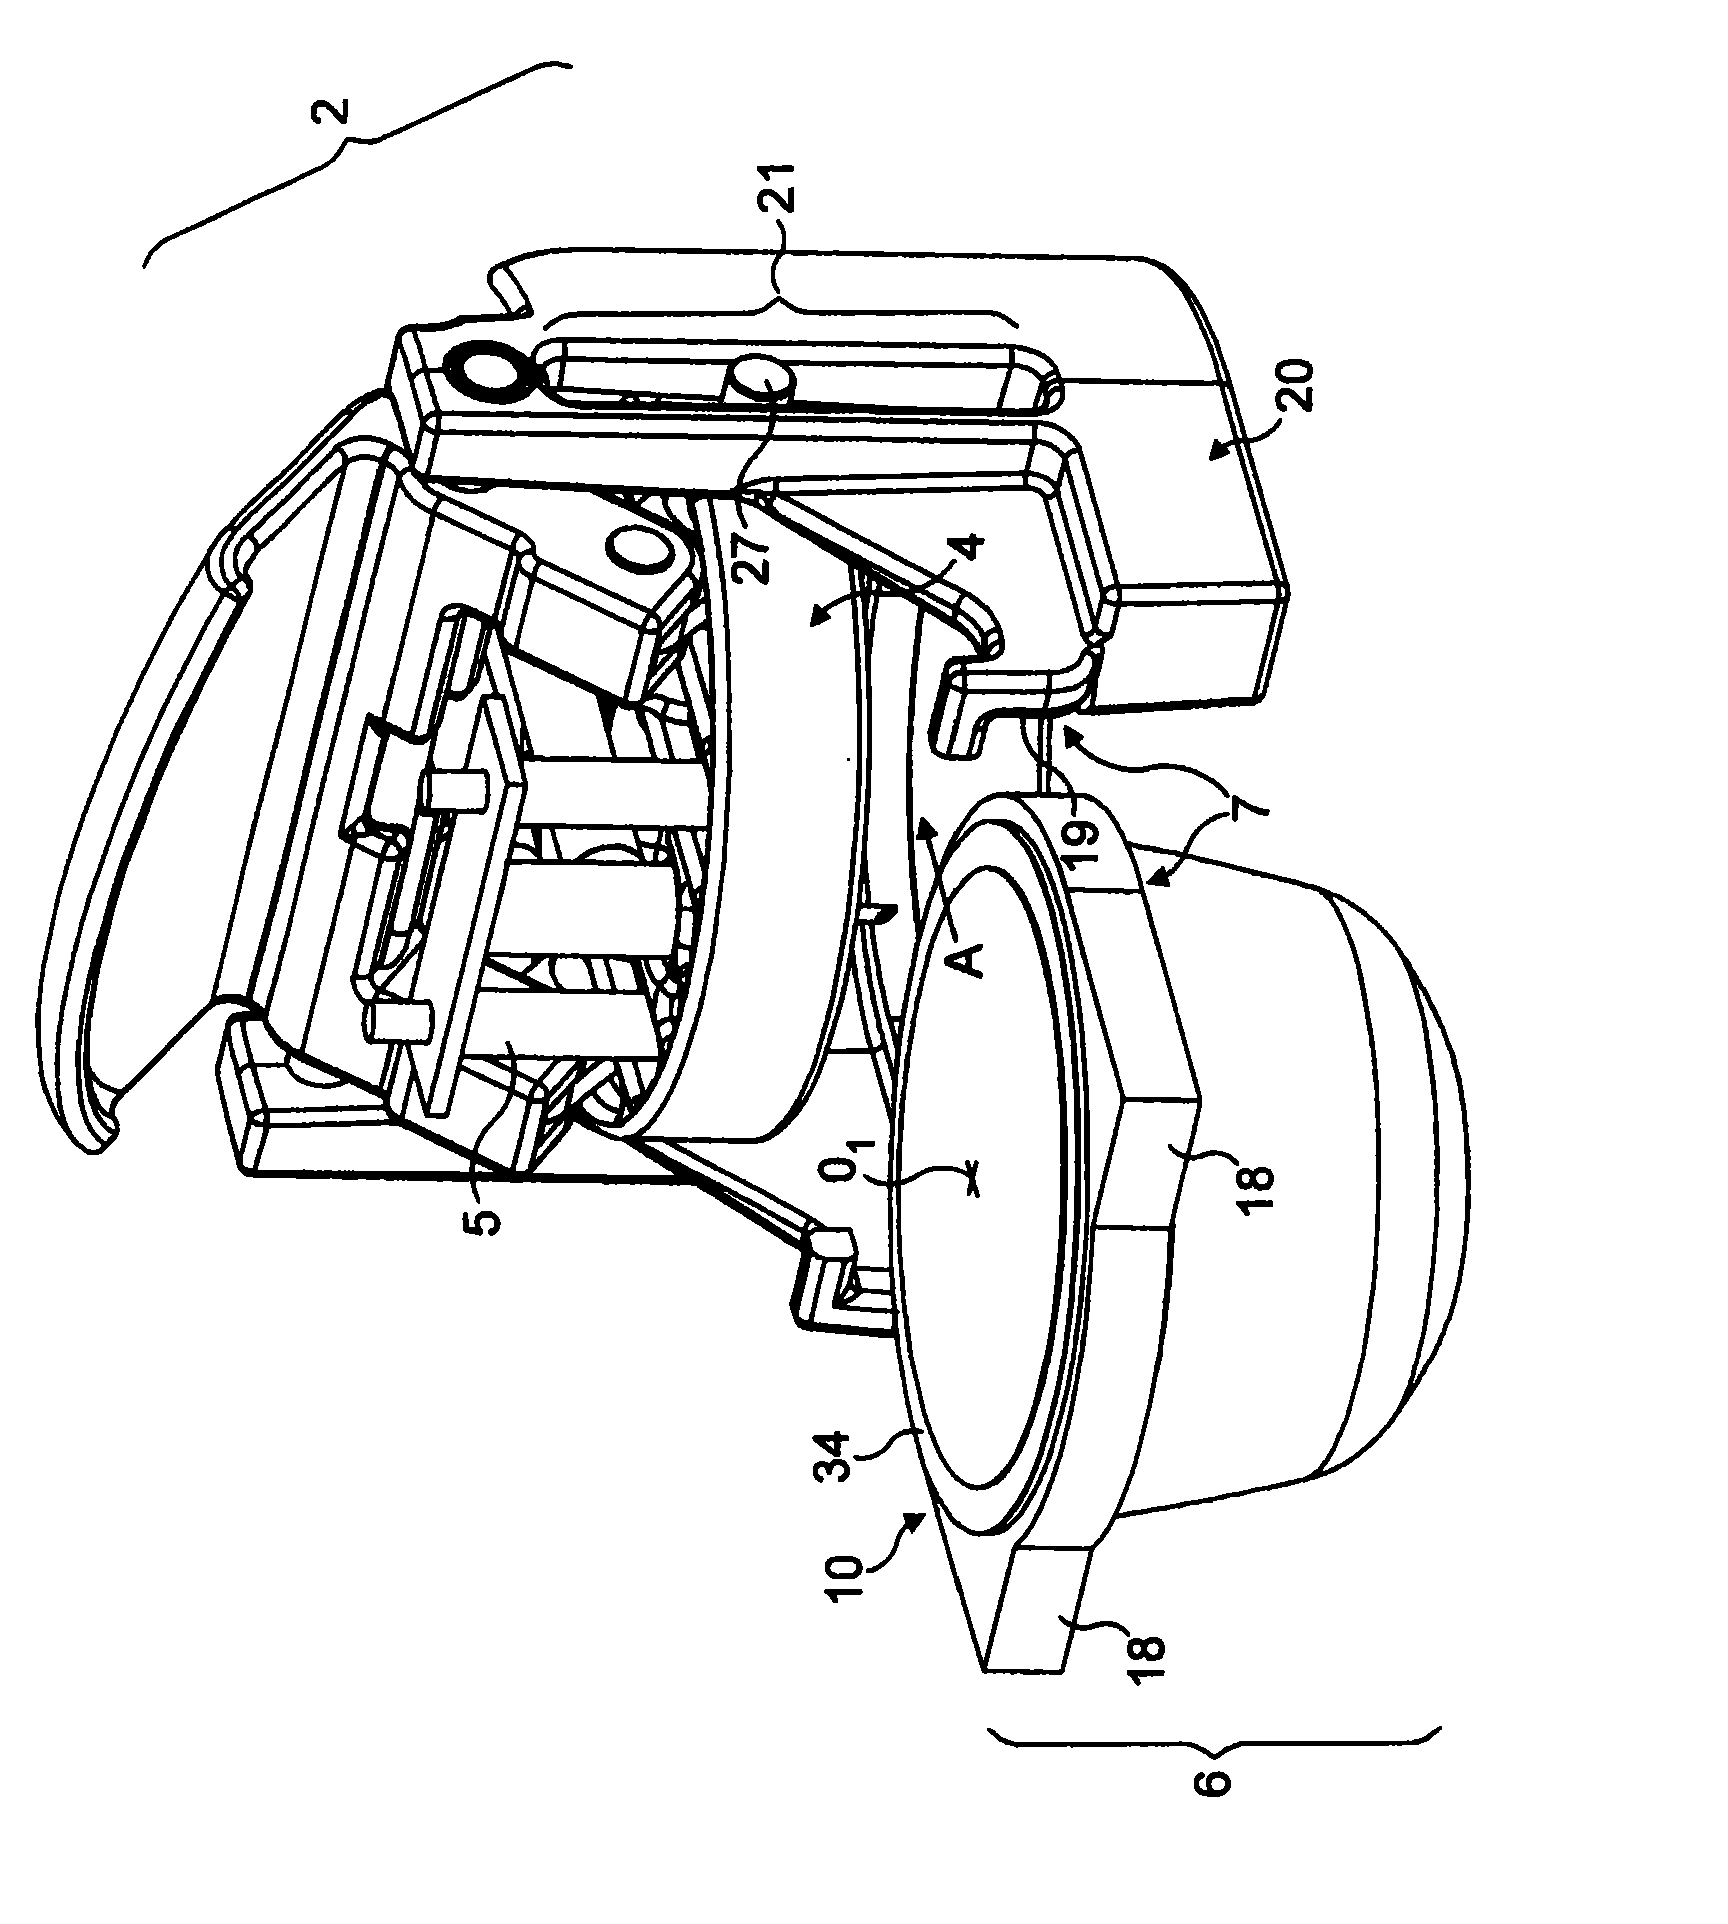 Device for preparing a liquid beverage from a cartridge